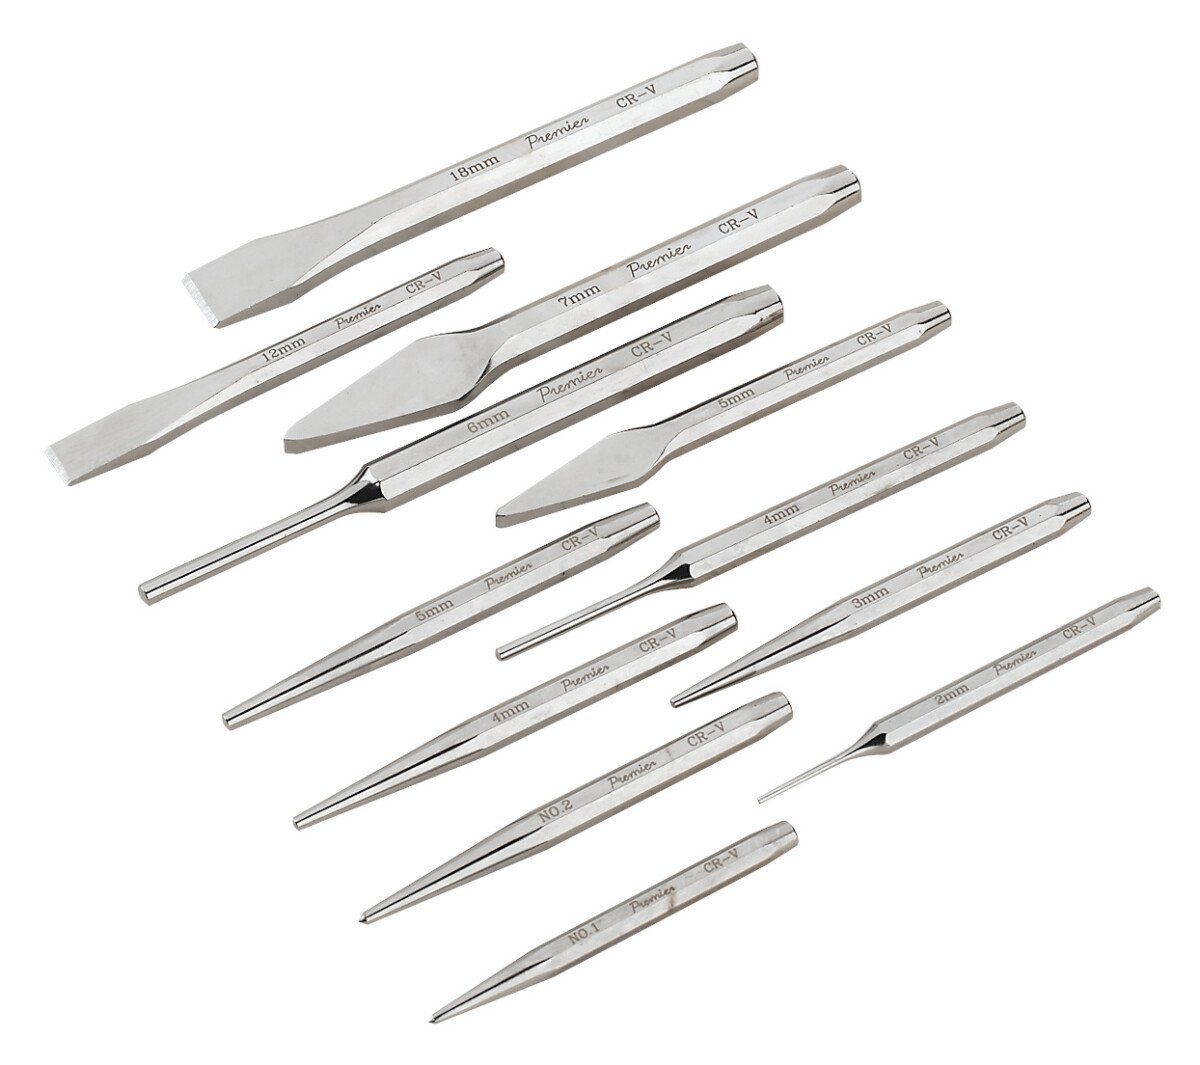 Sealey AK9129 Punch and Chisel Set 12 Piece